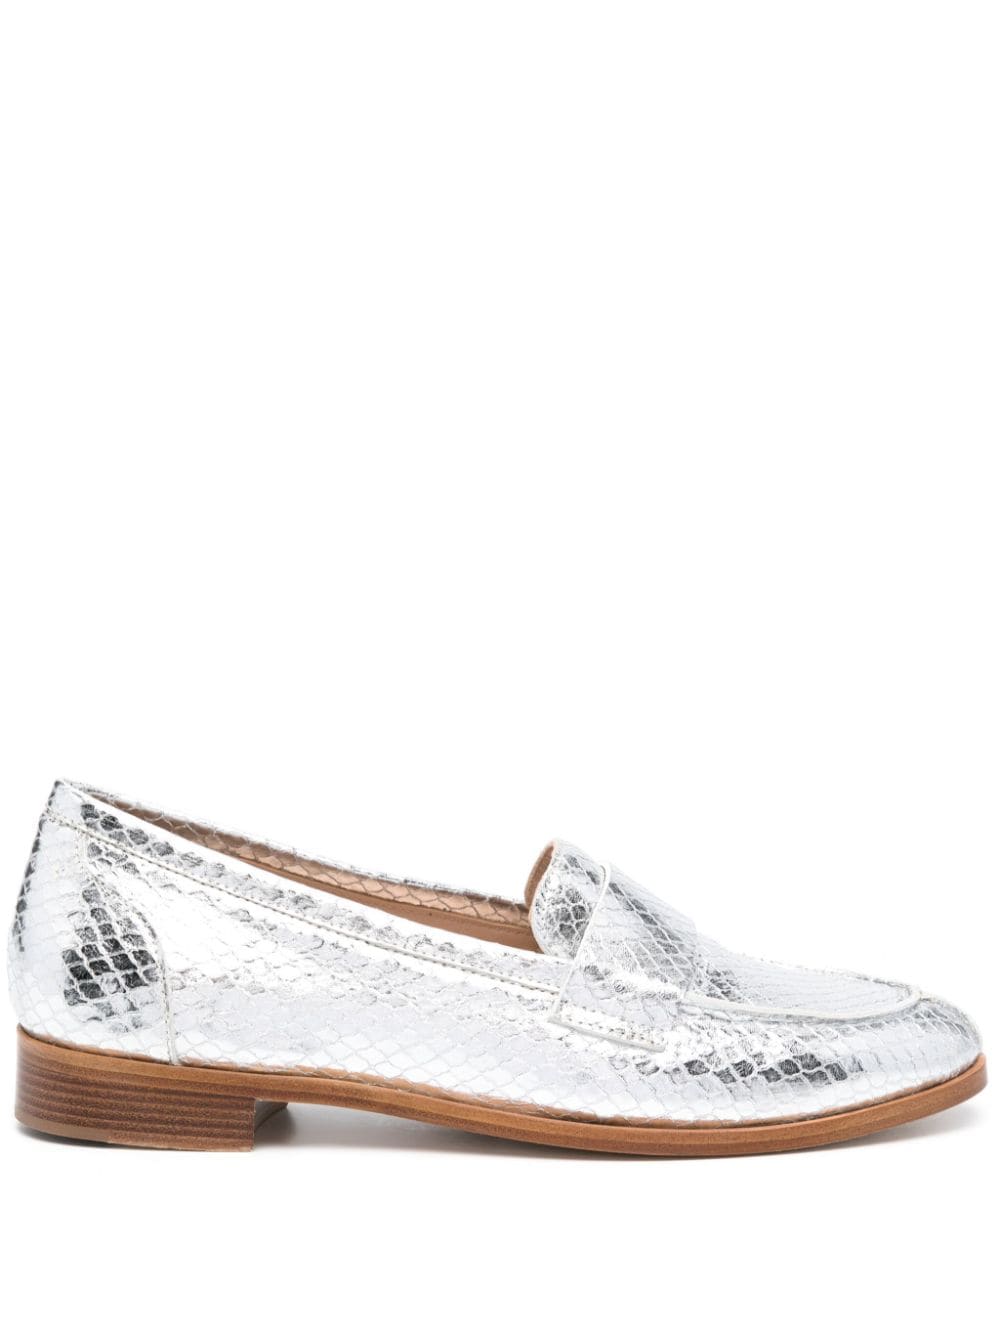 P.A.R.O.S.H. snake-effect loafers - Silver von P.A.R.O.S.H.